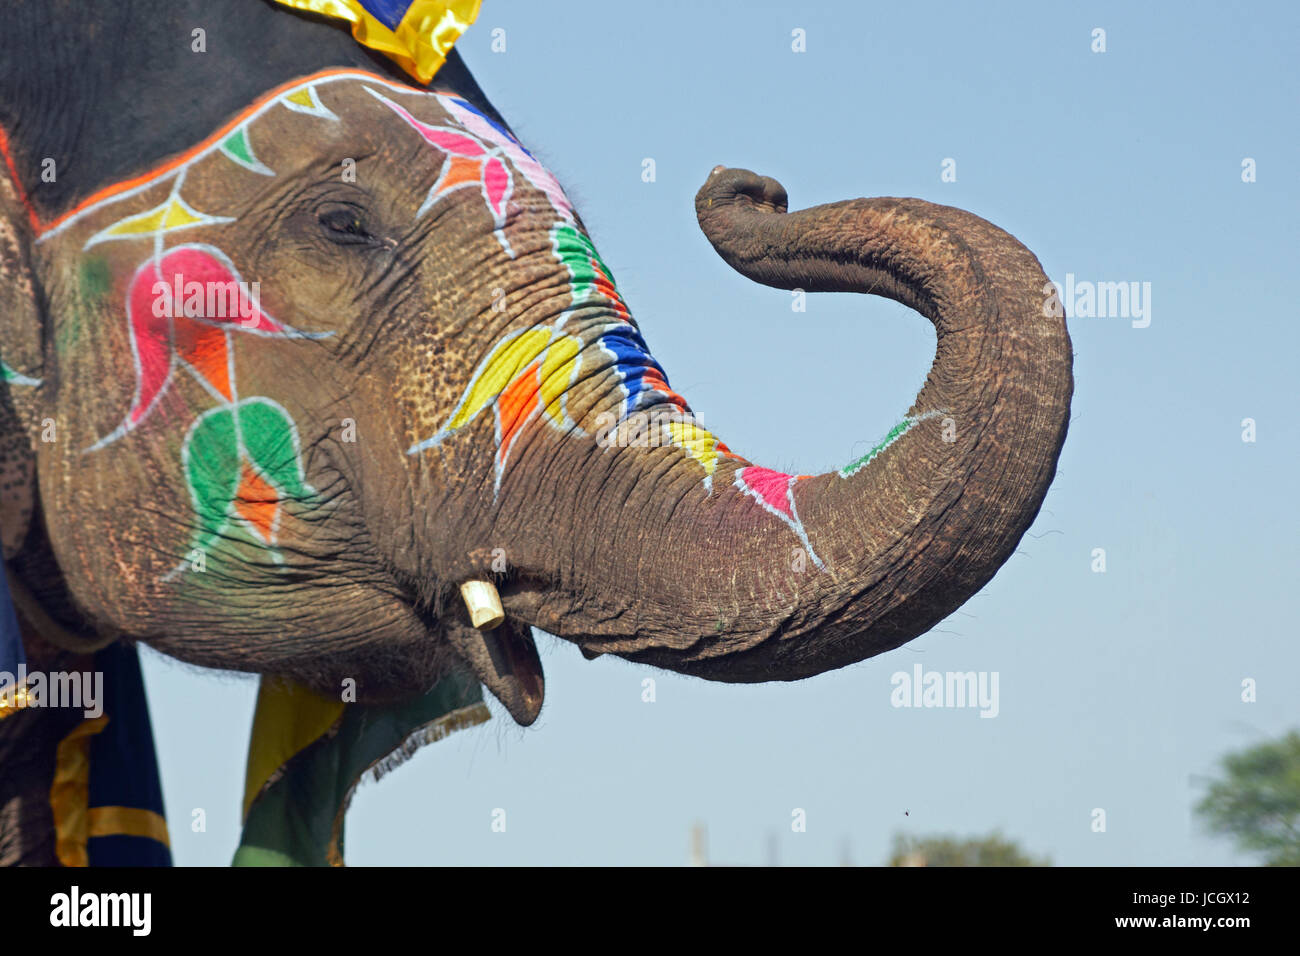 Elephant decorated with art work on its face saluting with its trunk at the annual elephant festival in Jaipur, Rajasthan, India Stock Photo